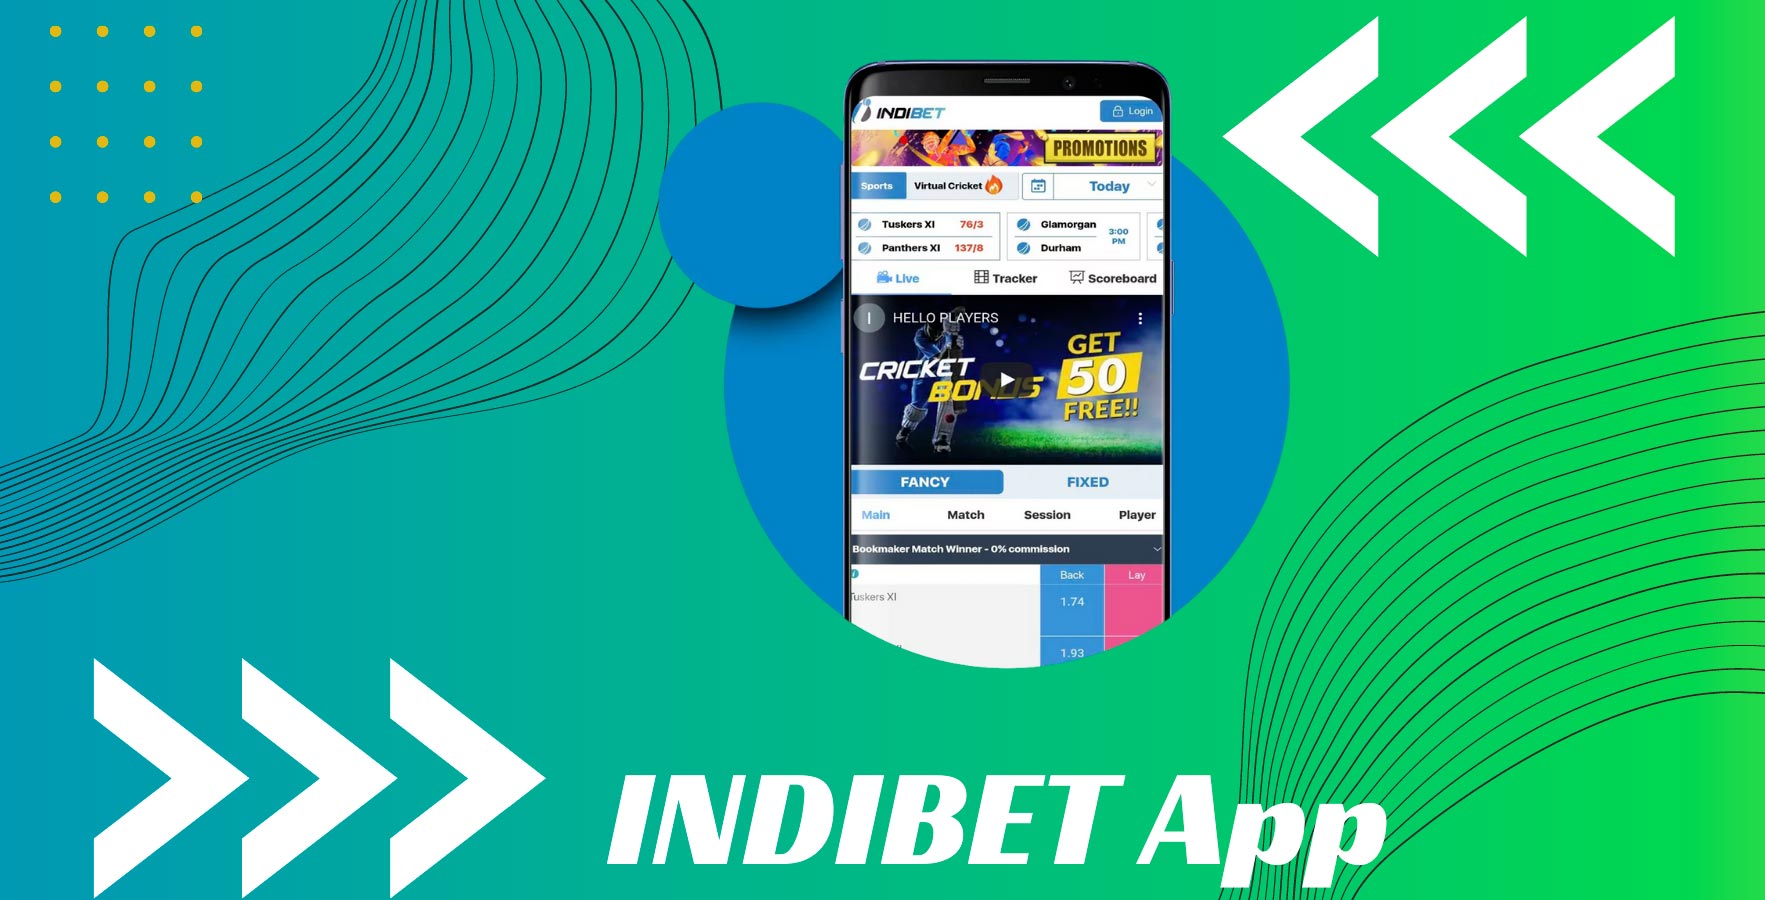 The INDIBET program includes all the functions of the mobile and desktop versions.